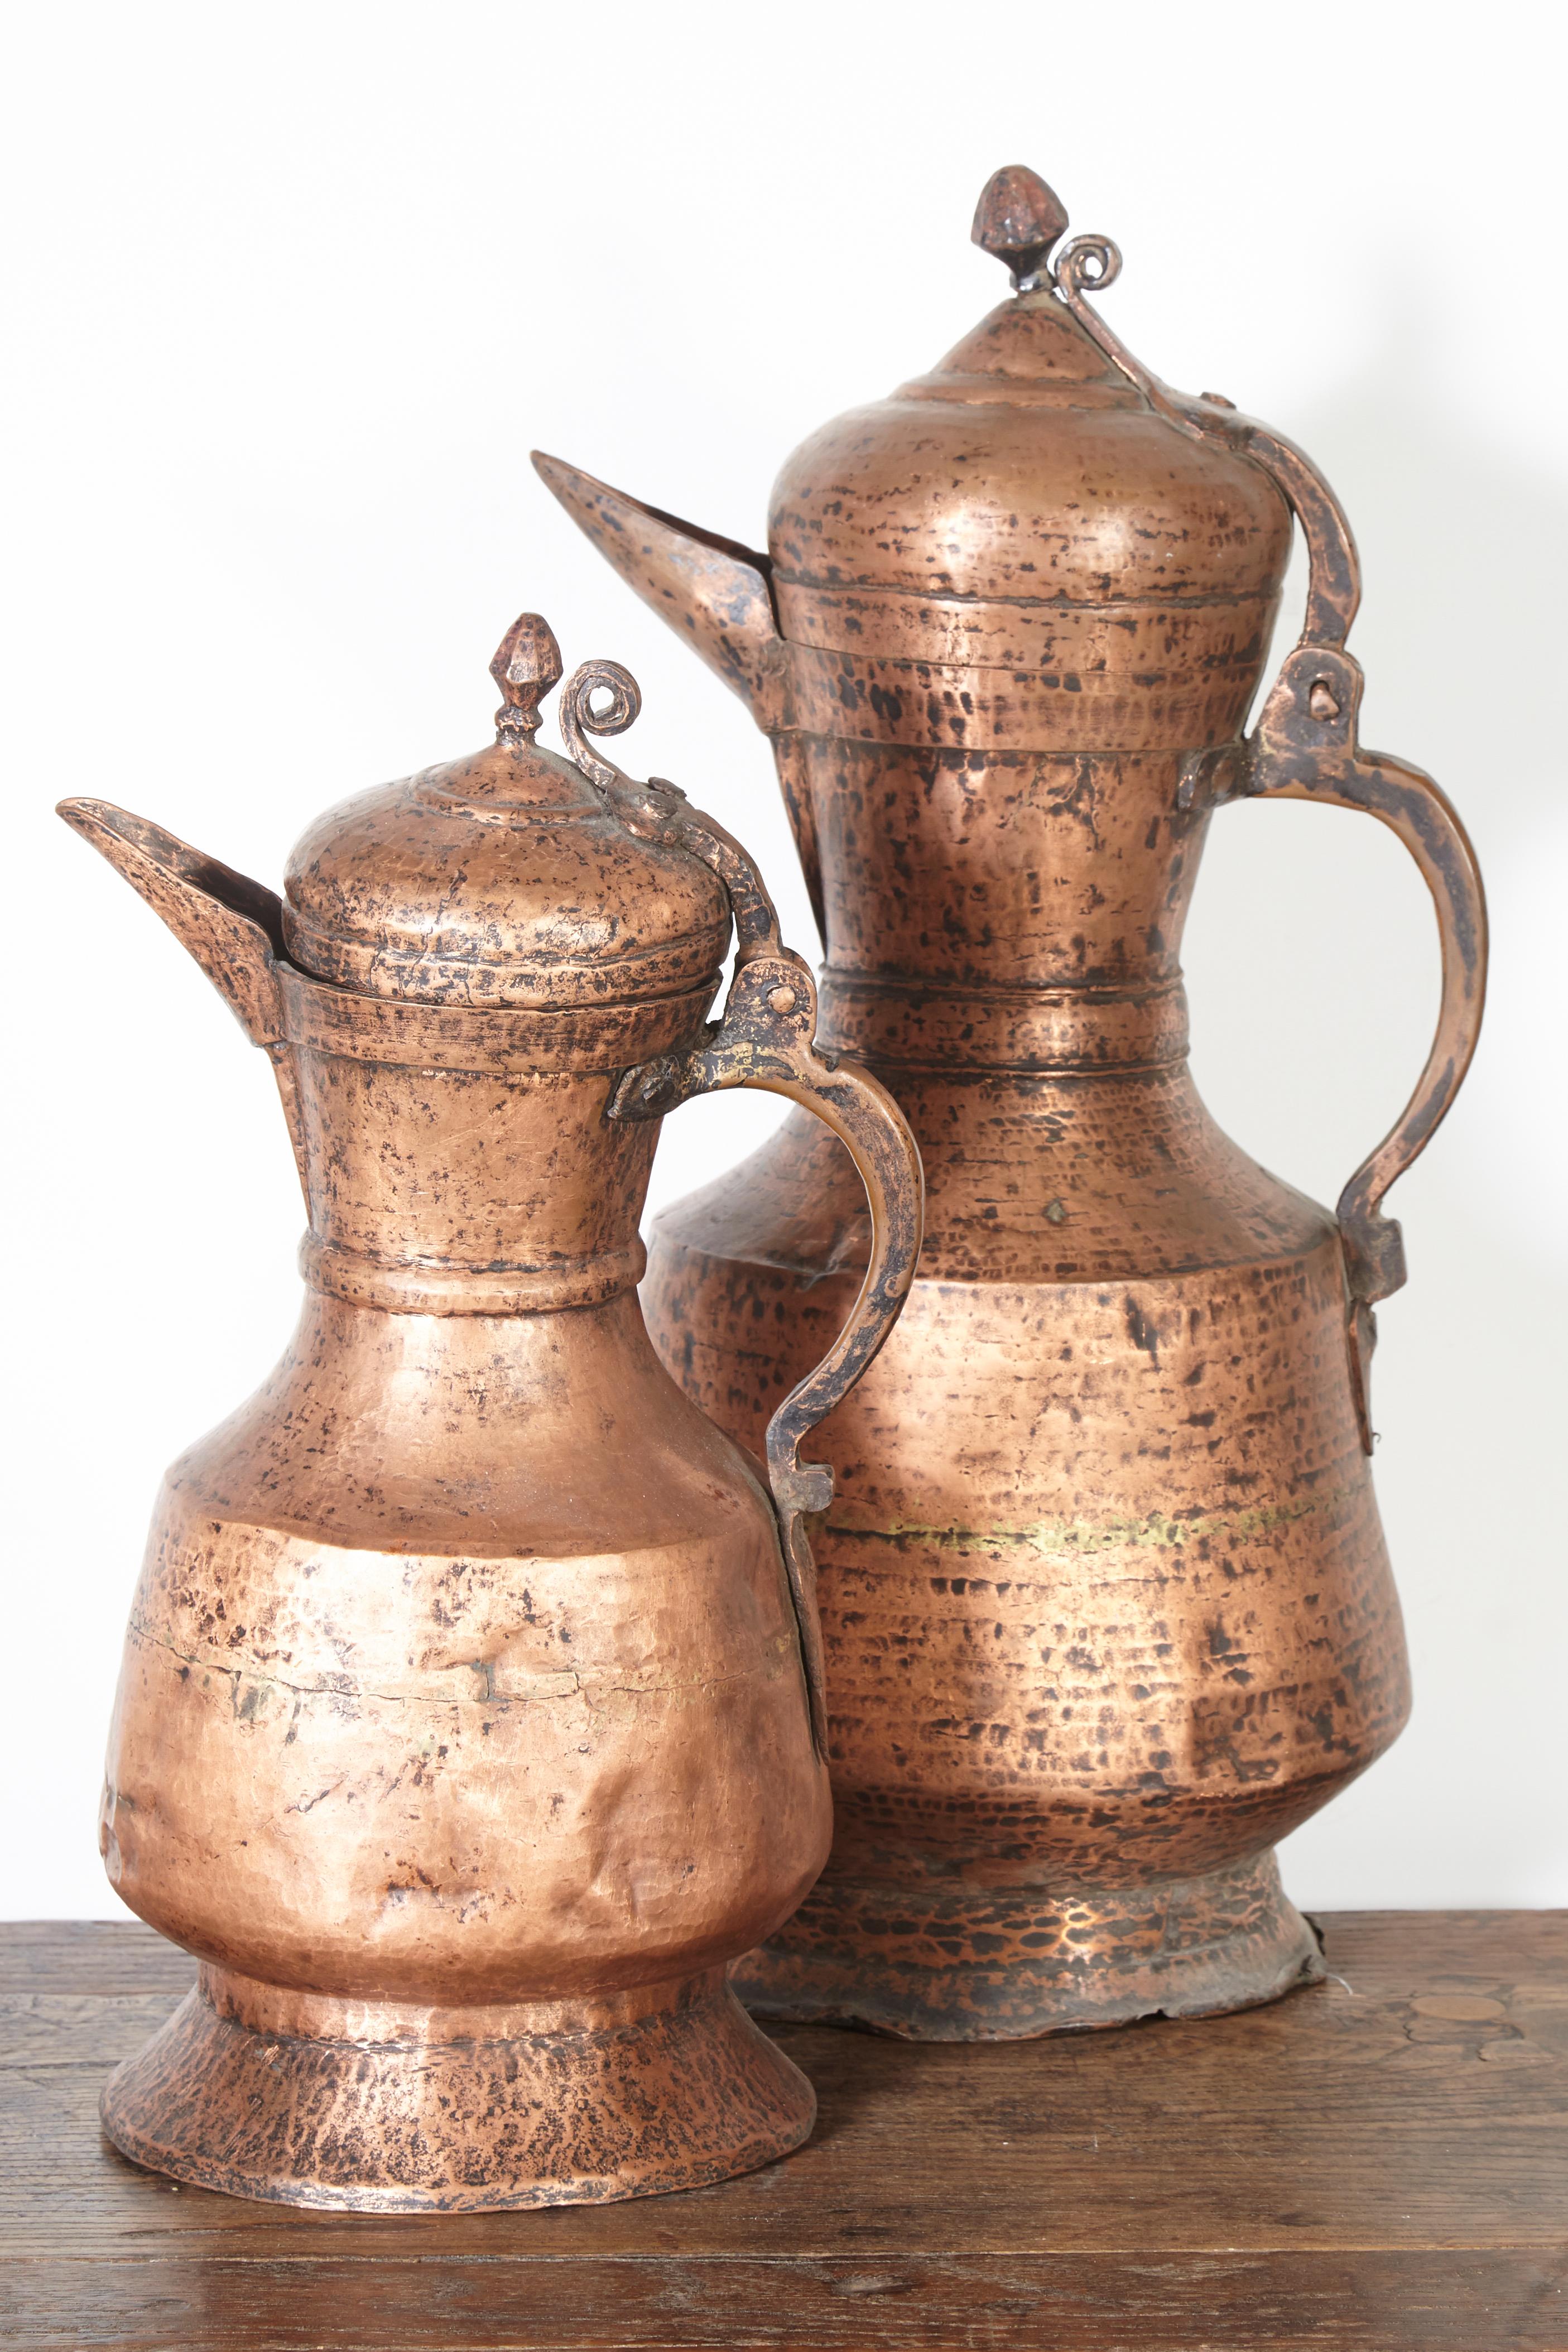 Two large, striking and beautifully crafted copper ceremonial water pitchers from Tibet.
The lovely, well-worn patina communicates years of loving and spiritual use.
Priced and sold individually.
Dimensions:
Large: Diameter 9, height 19
Small: